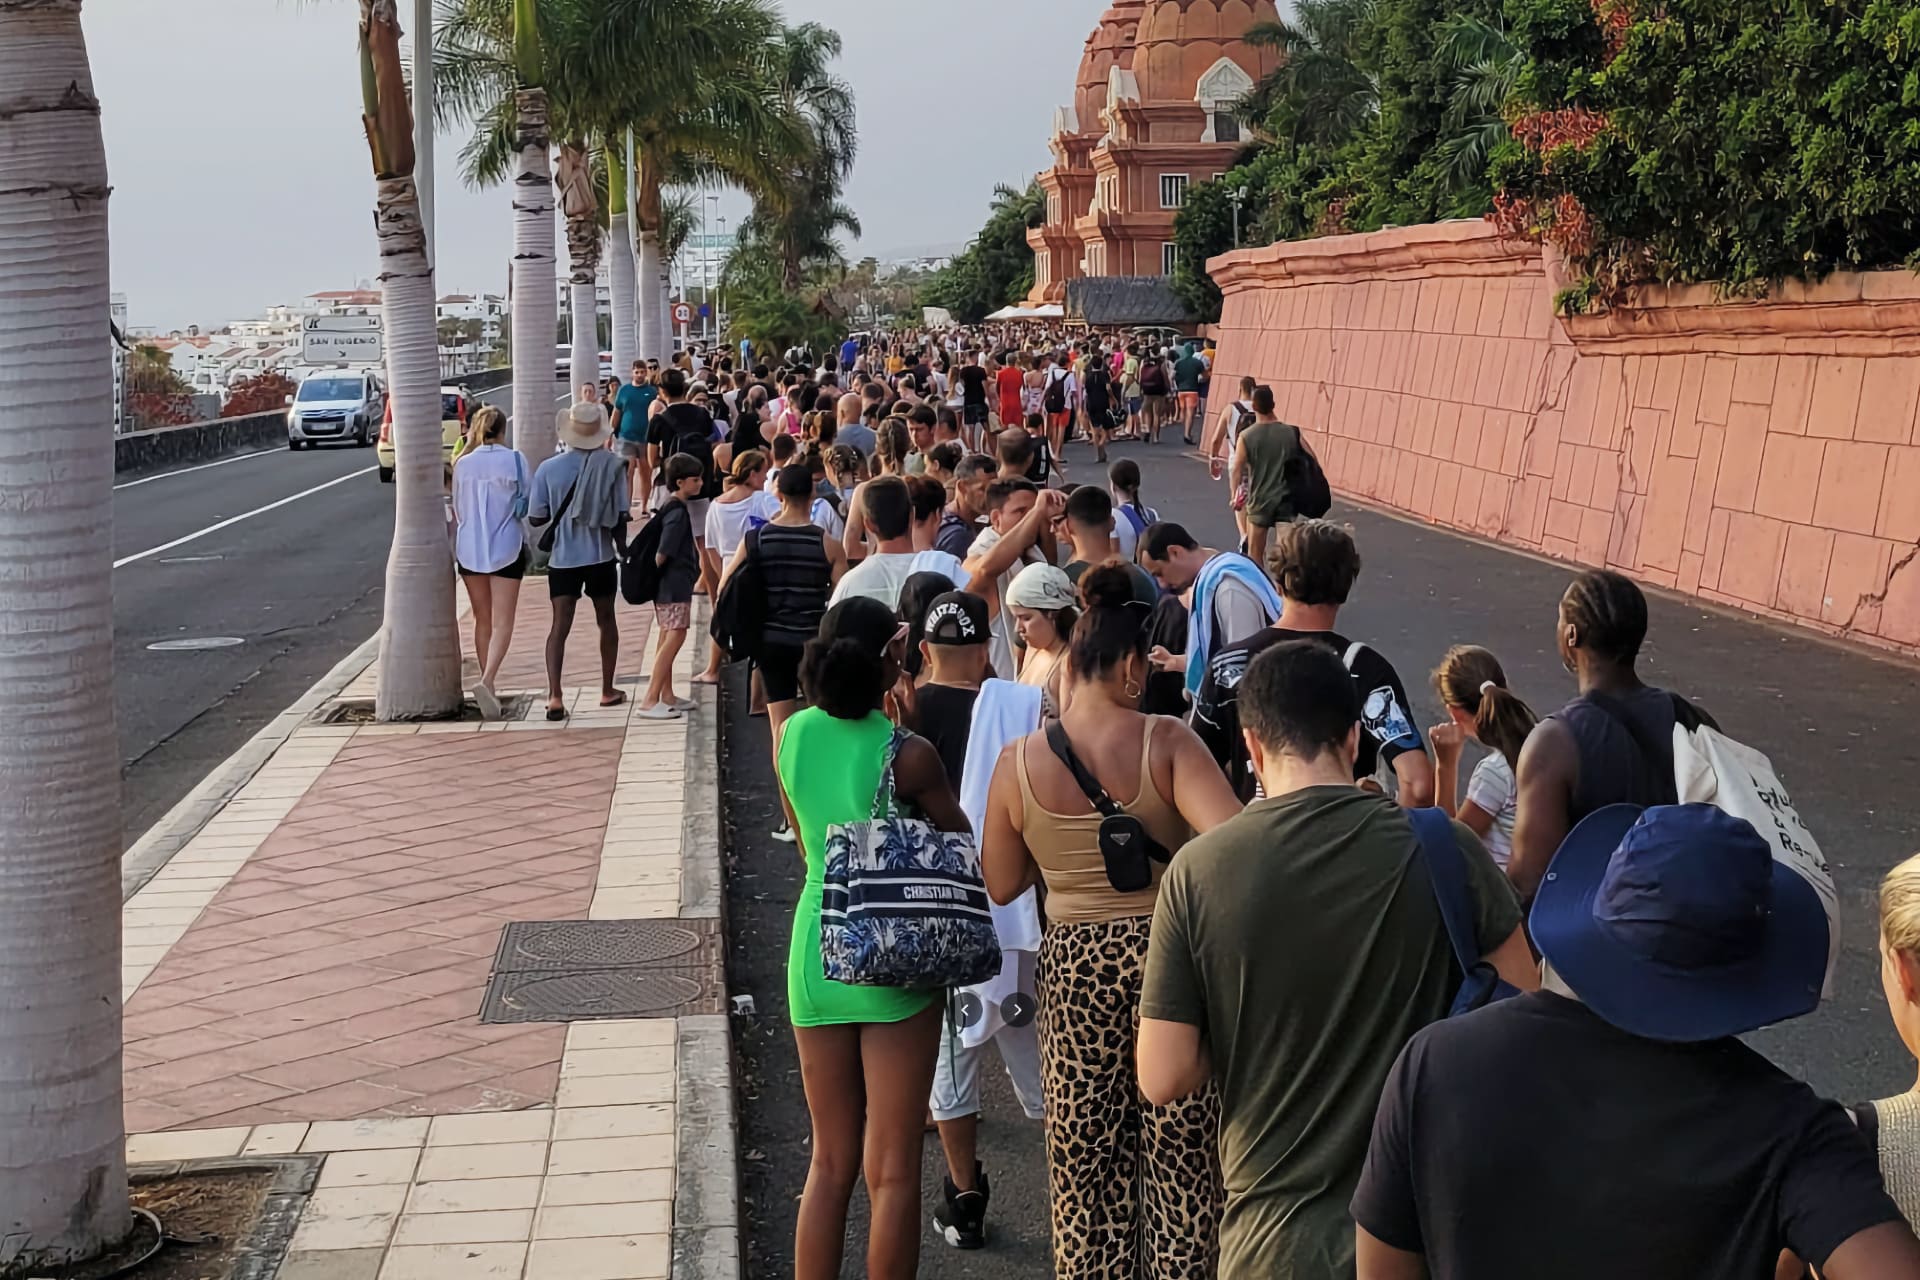 crowd at the entrance to Siam Park